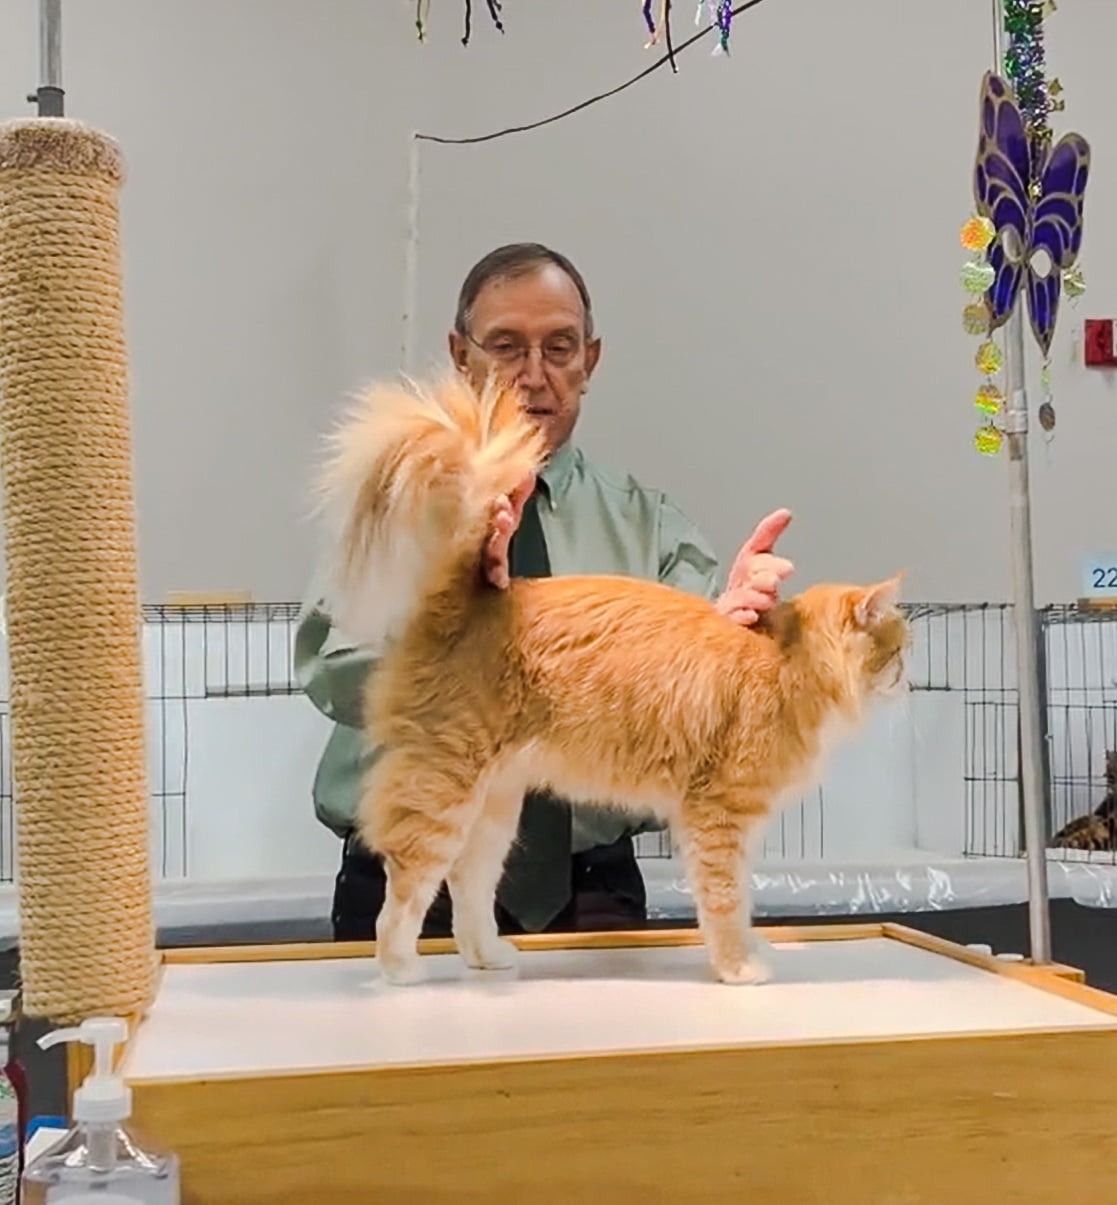 Judging an NFC at a cat show and pointing out the length of the NFC